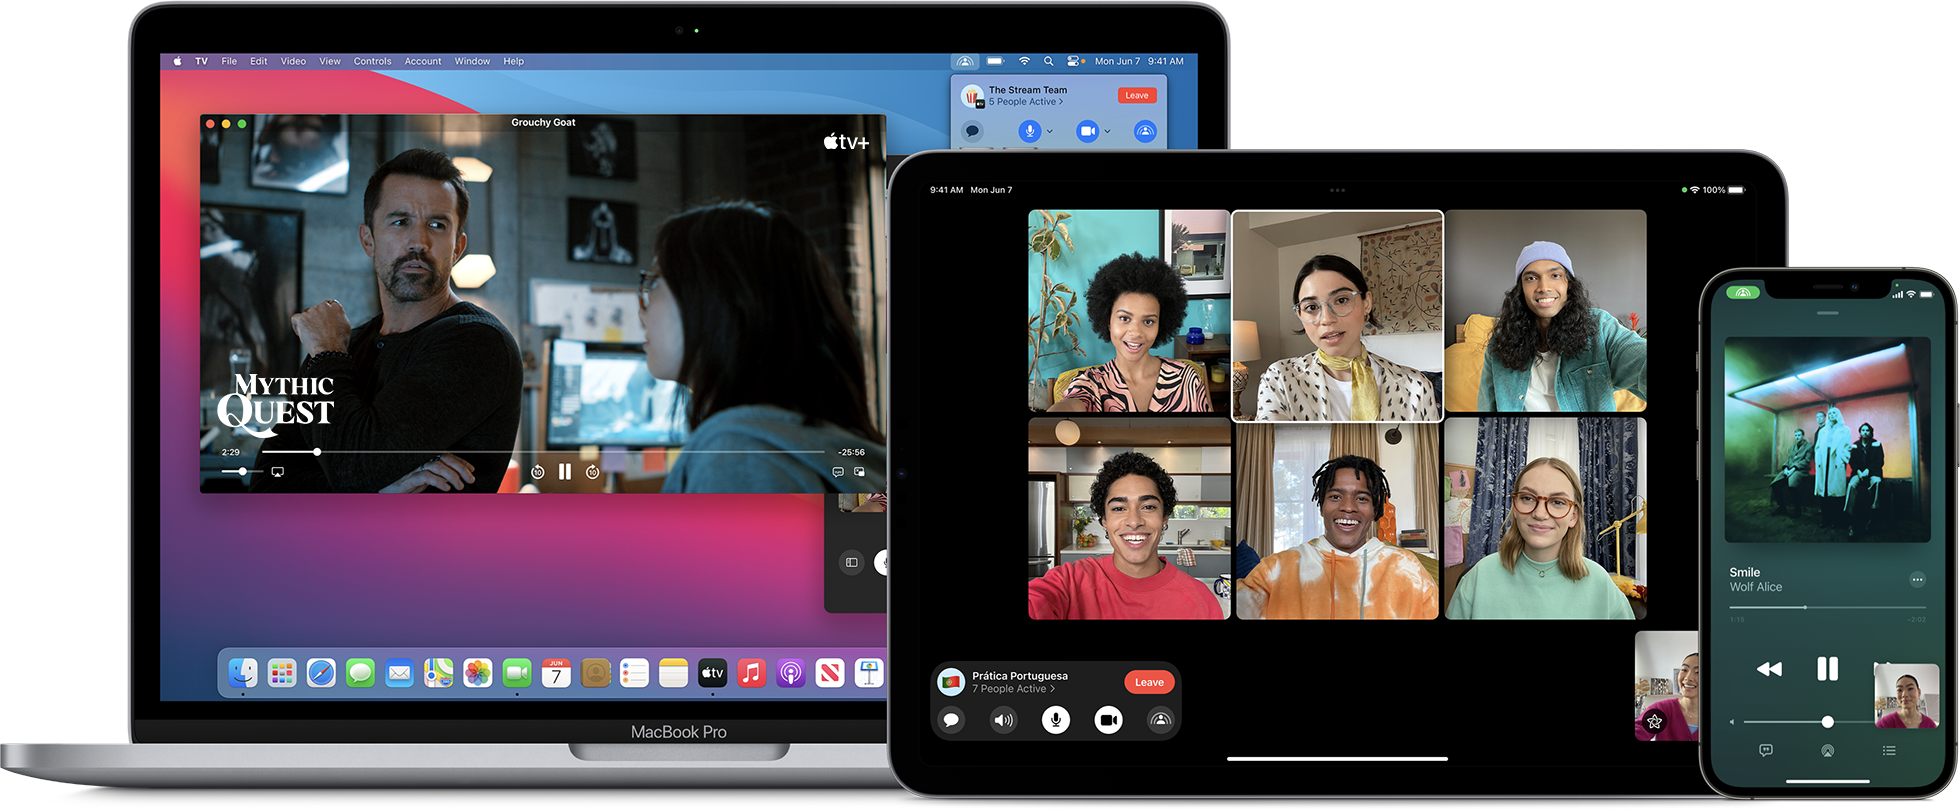 SharePlay; Experience media together via FaceTime on different devices